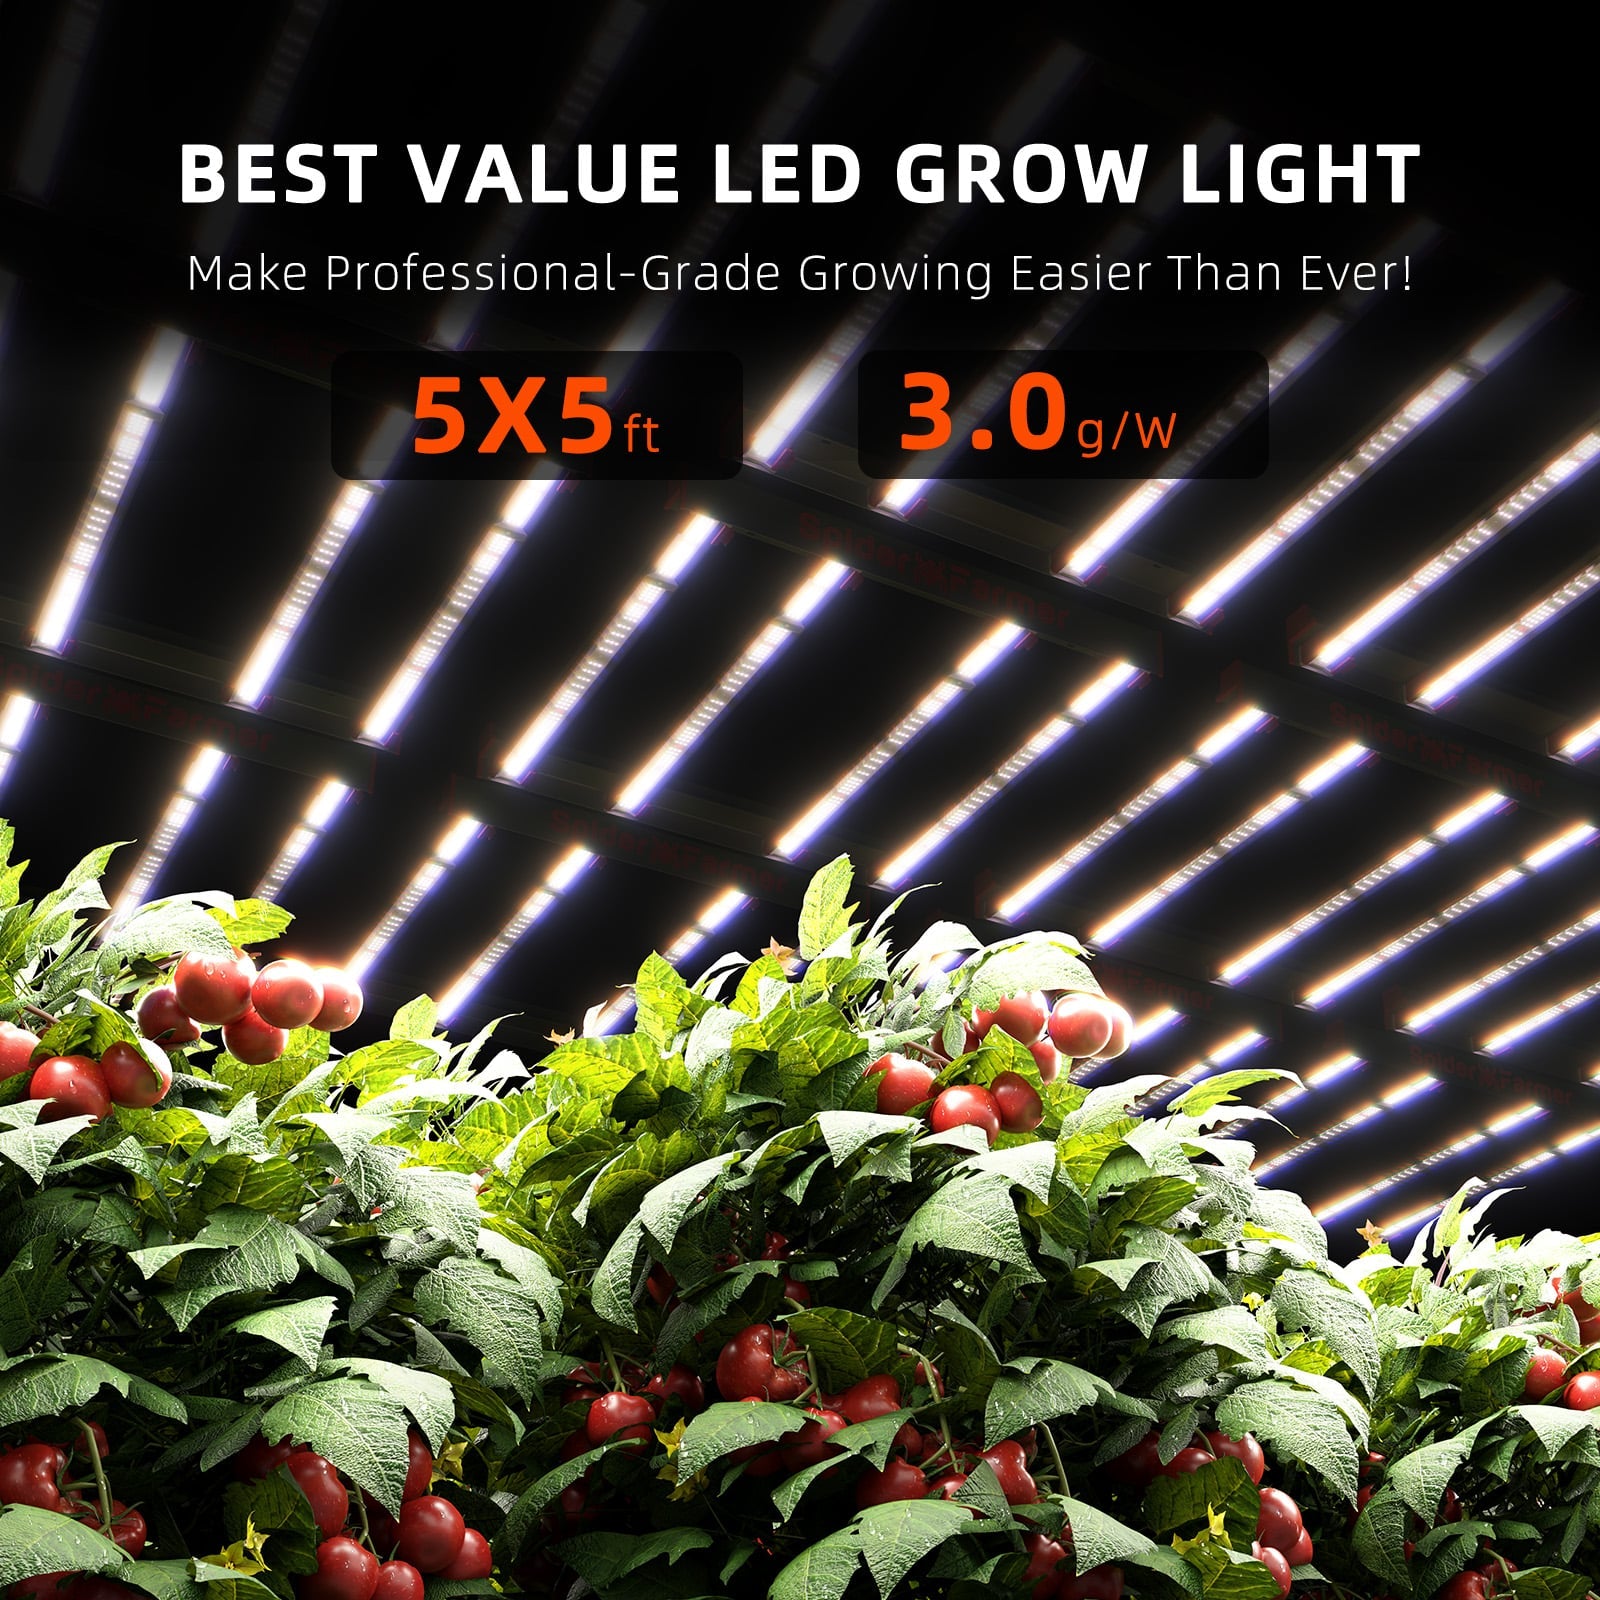 Product Secondary Image:Spider Farmer® G1000W Dimmable Cost-effective Full Spectrum CO2 Commercial LED Grow Light